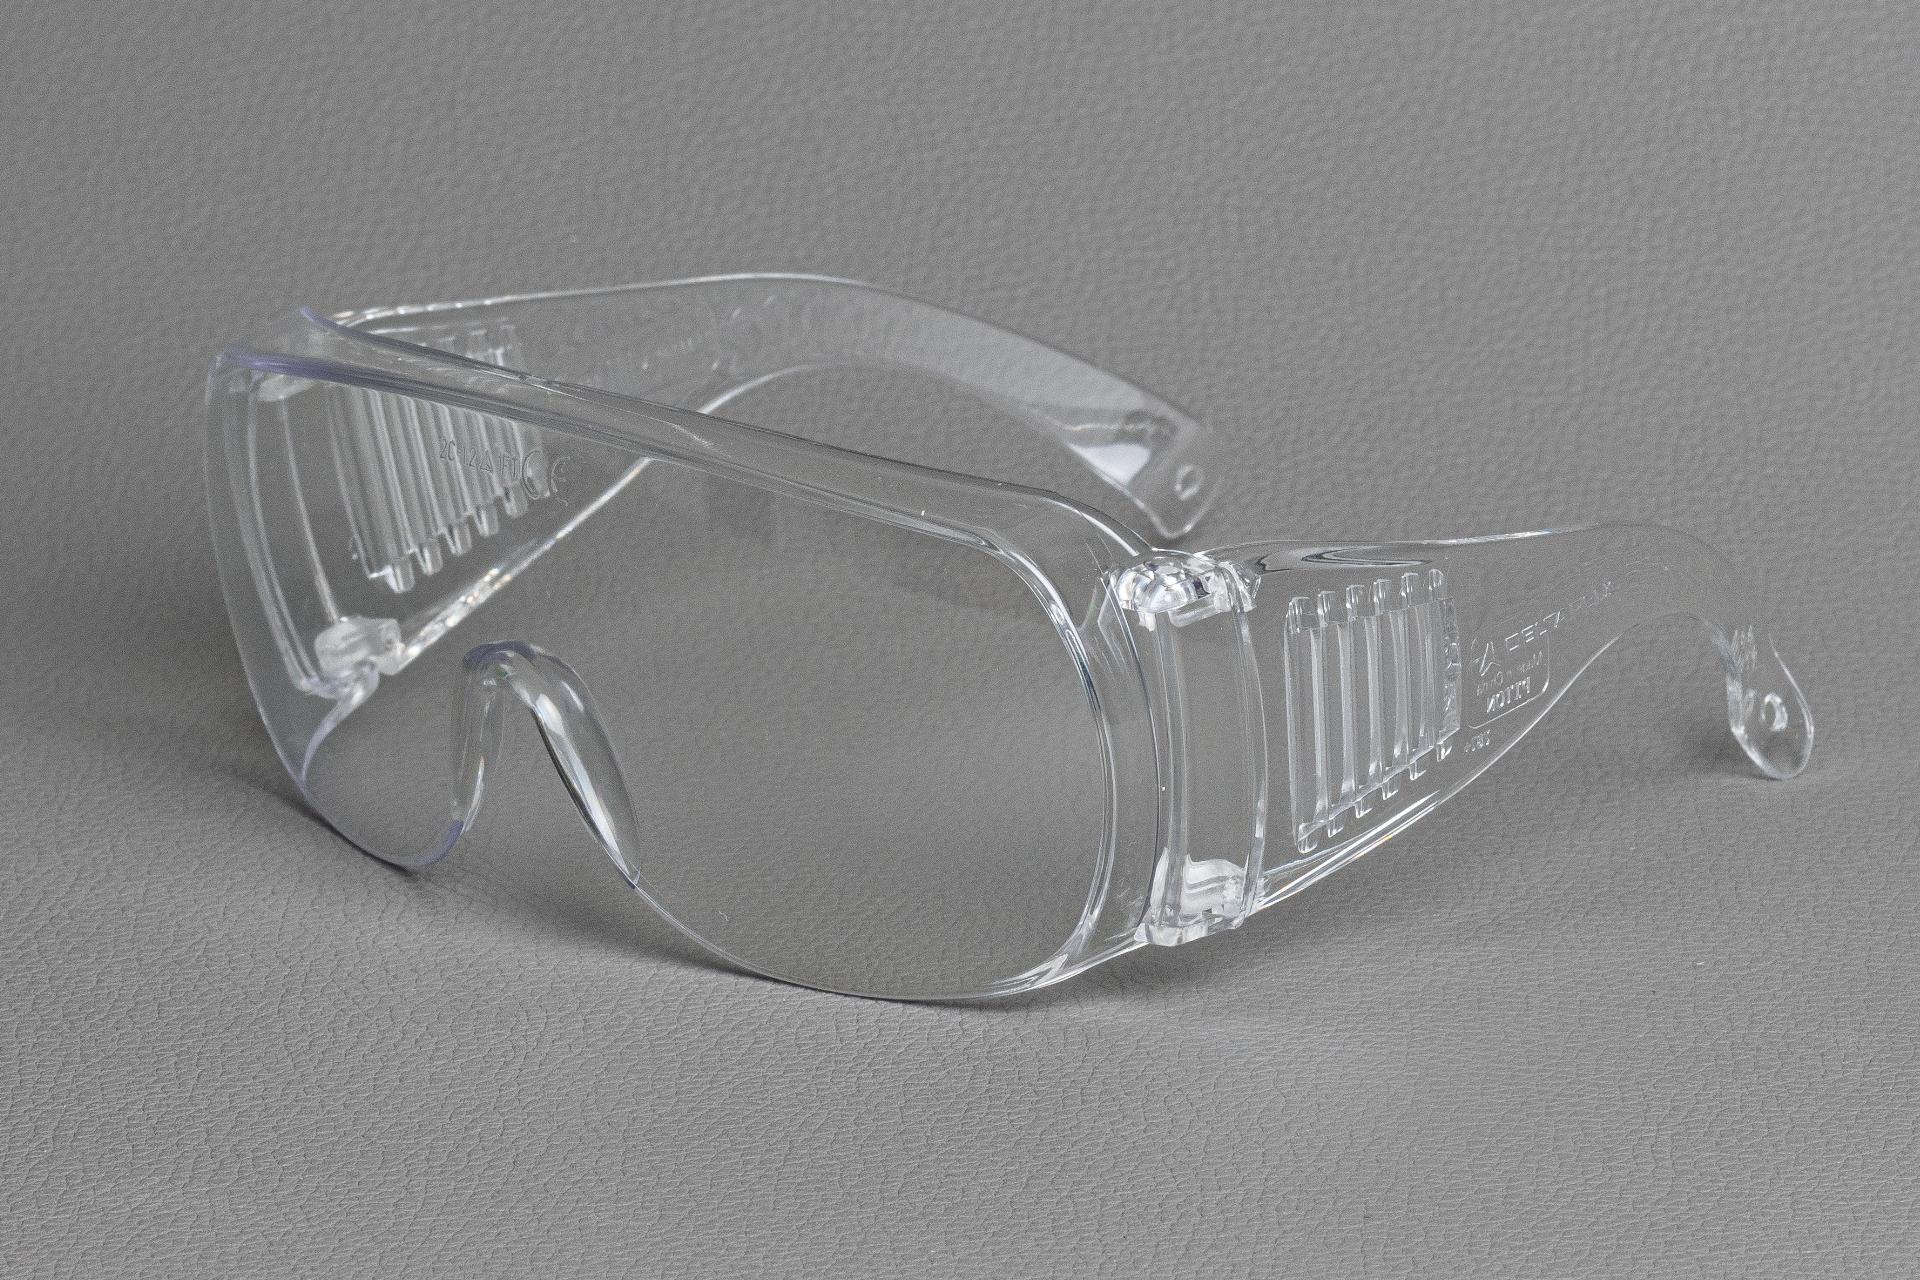 Foto: SolProtect Schutzbrille / Safety Glasses